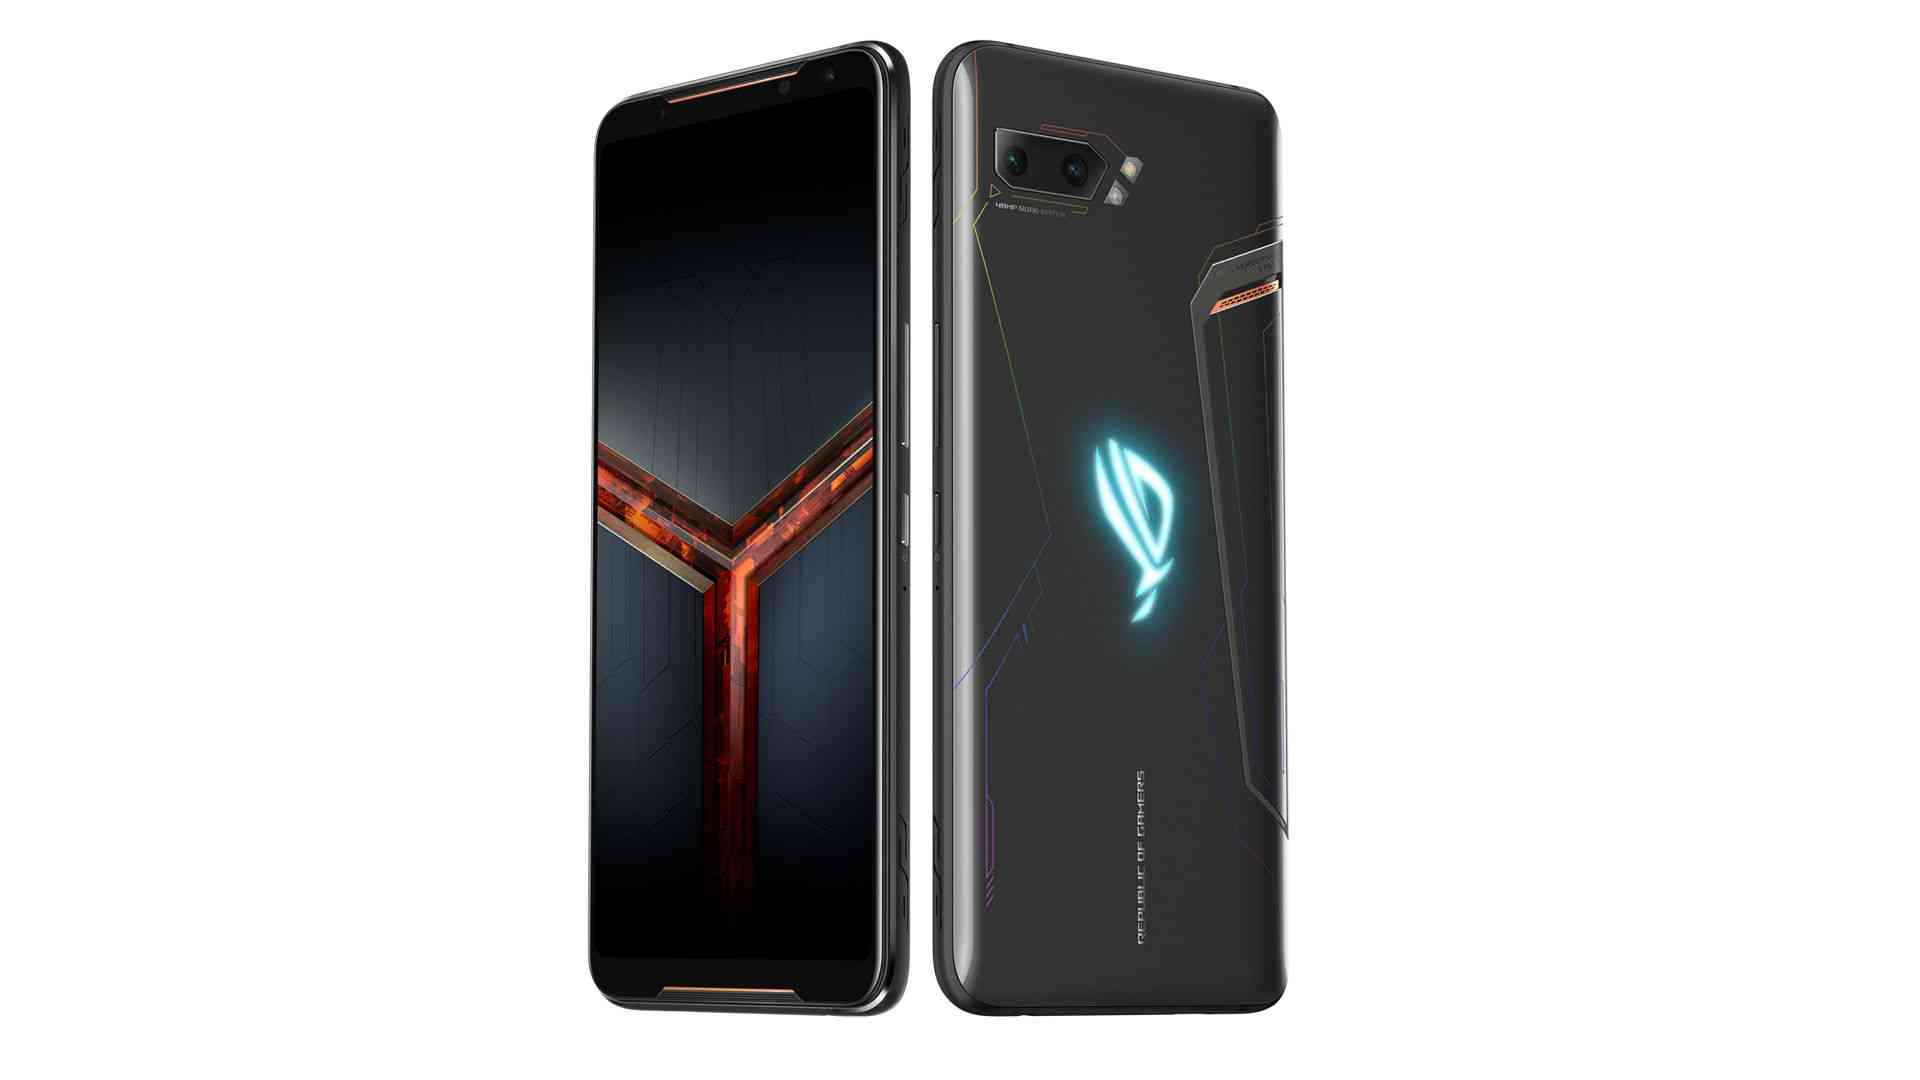 asus rog phone 2 ultimate edition price and features 3052 big 1